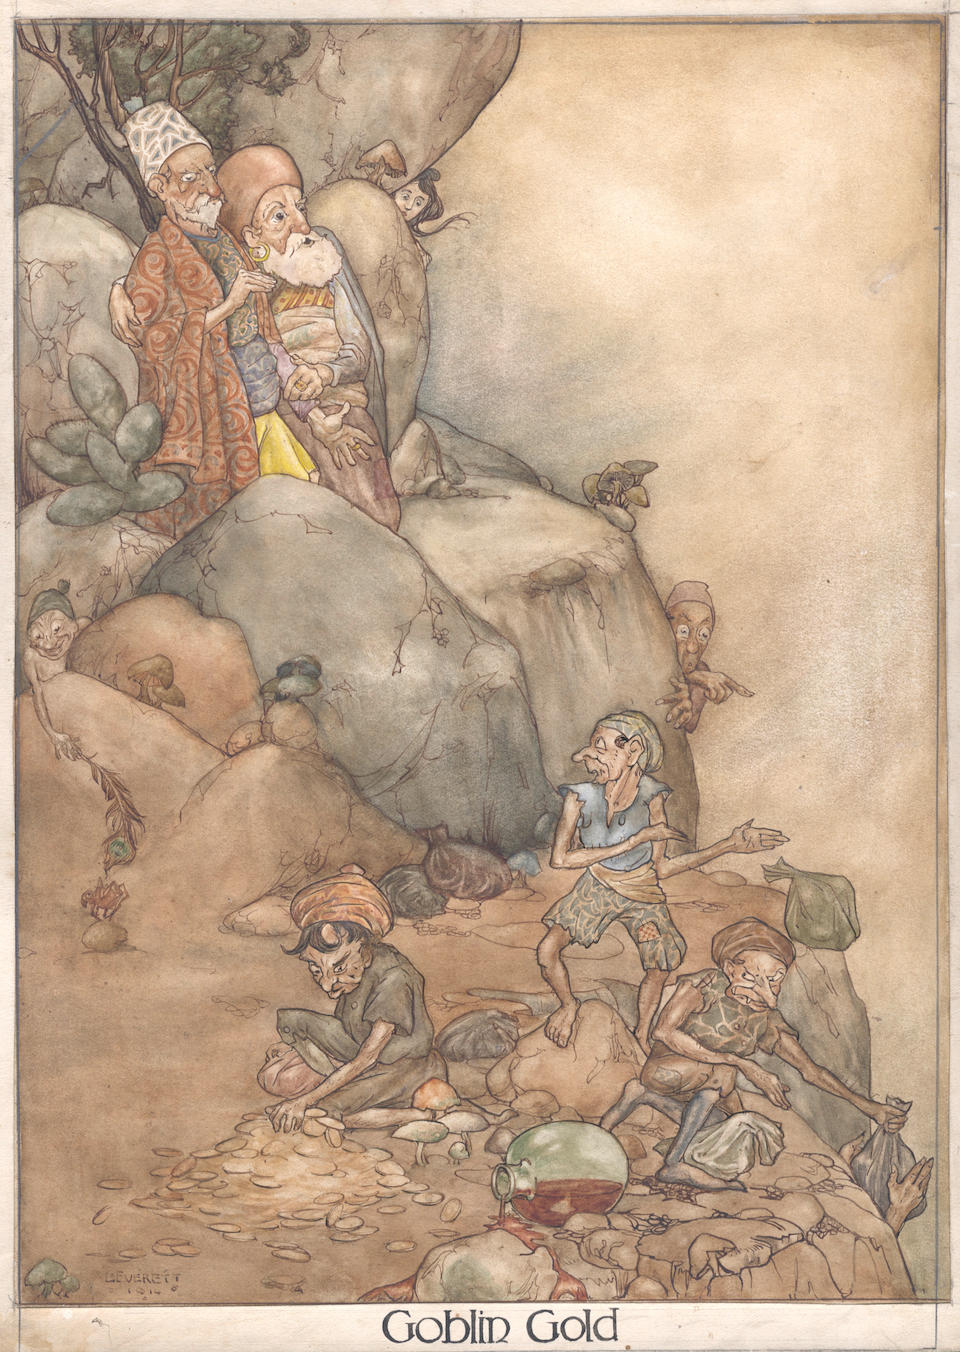 ORIGINAL ARTWORK - ARCHIVE Archive of original artwork by Leslie F. Everett, working in the style of Arthur Rackham, John Hassall, Dulac, Laurence Housman, and the classic Edwardian periodical artists